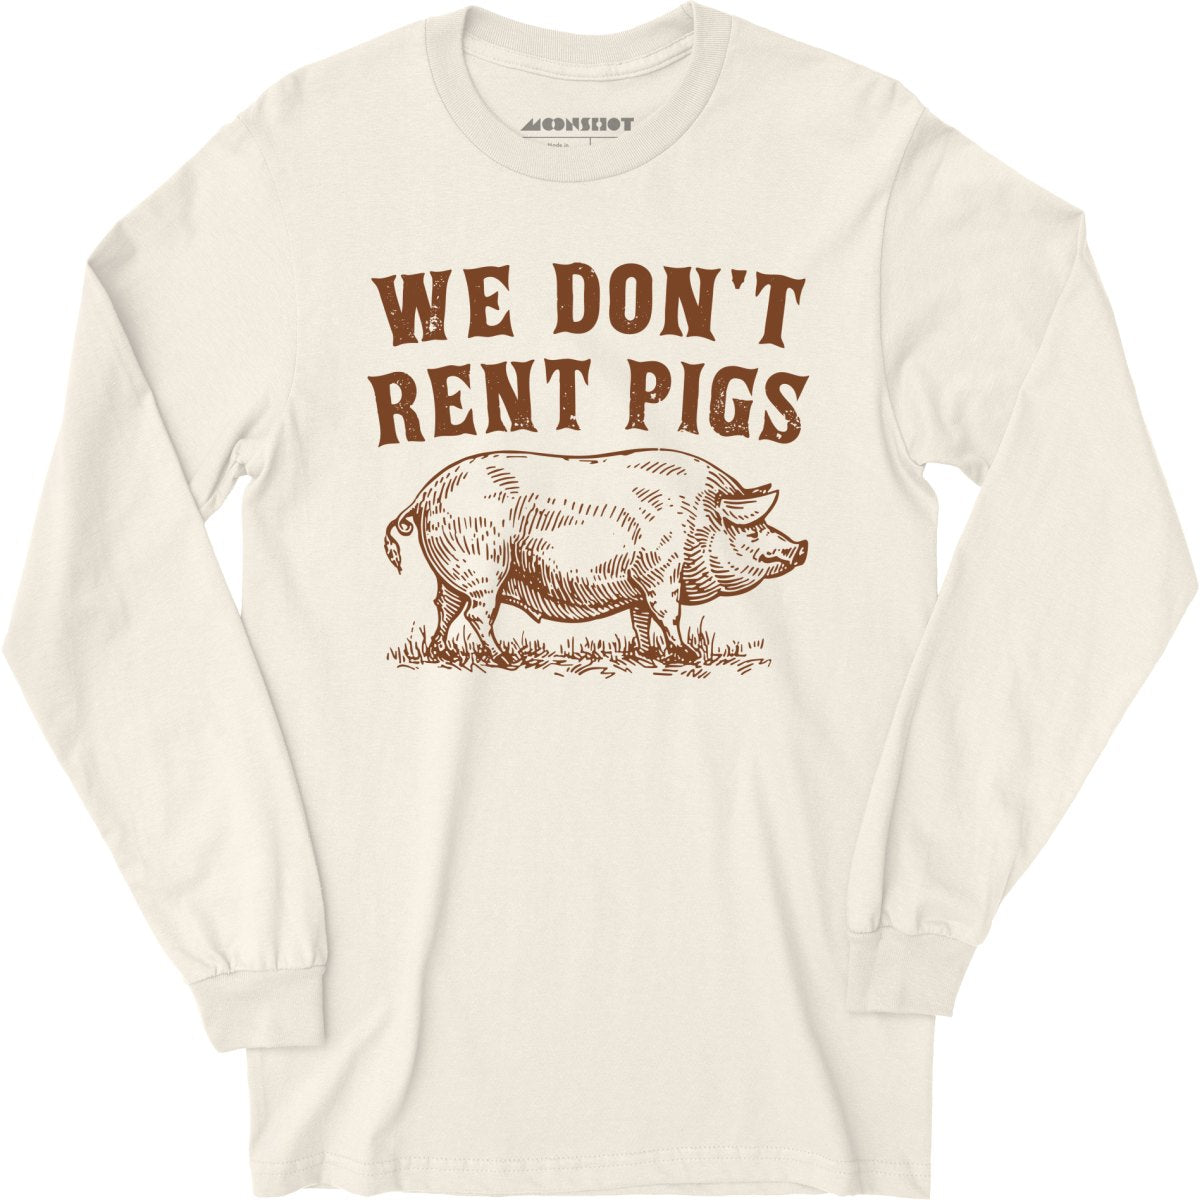 We Don't Rent Pigs - Long Sleeve T-Shirt